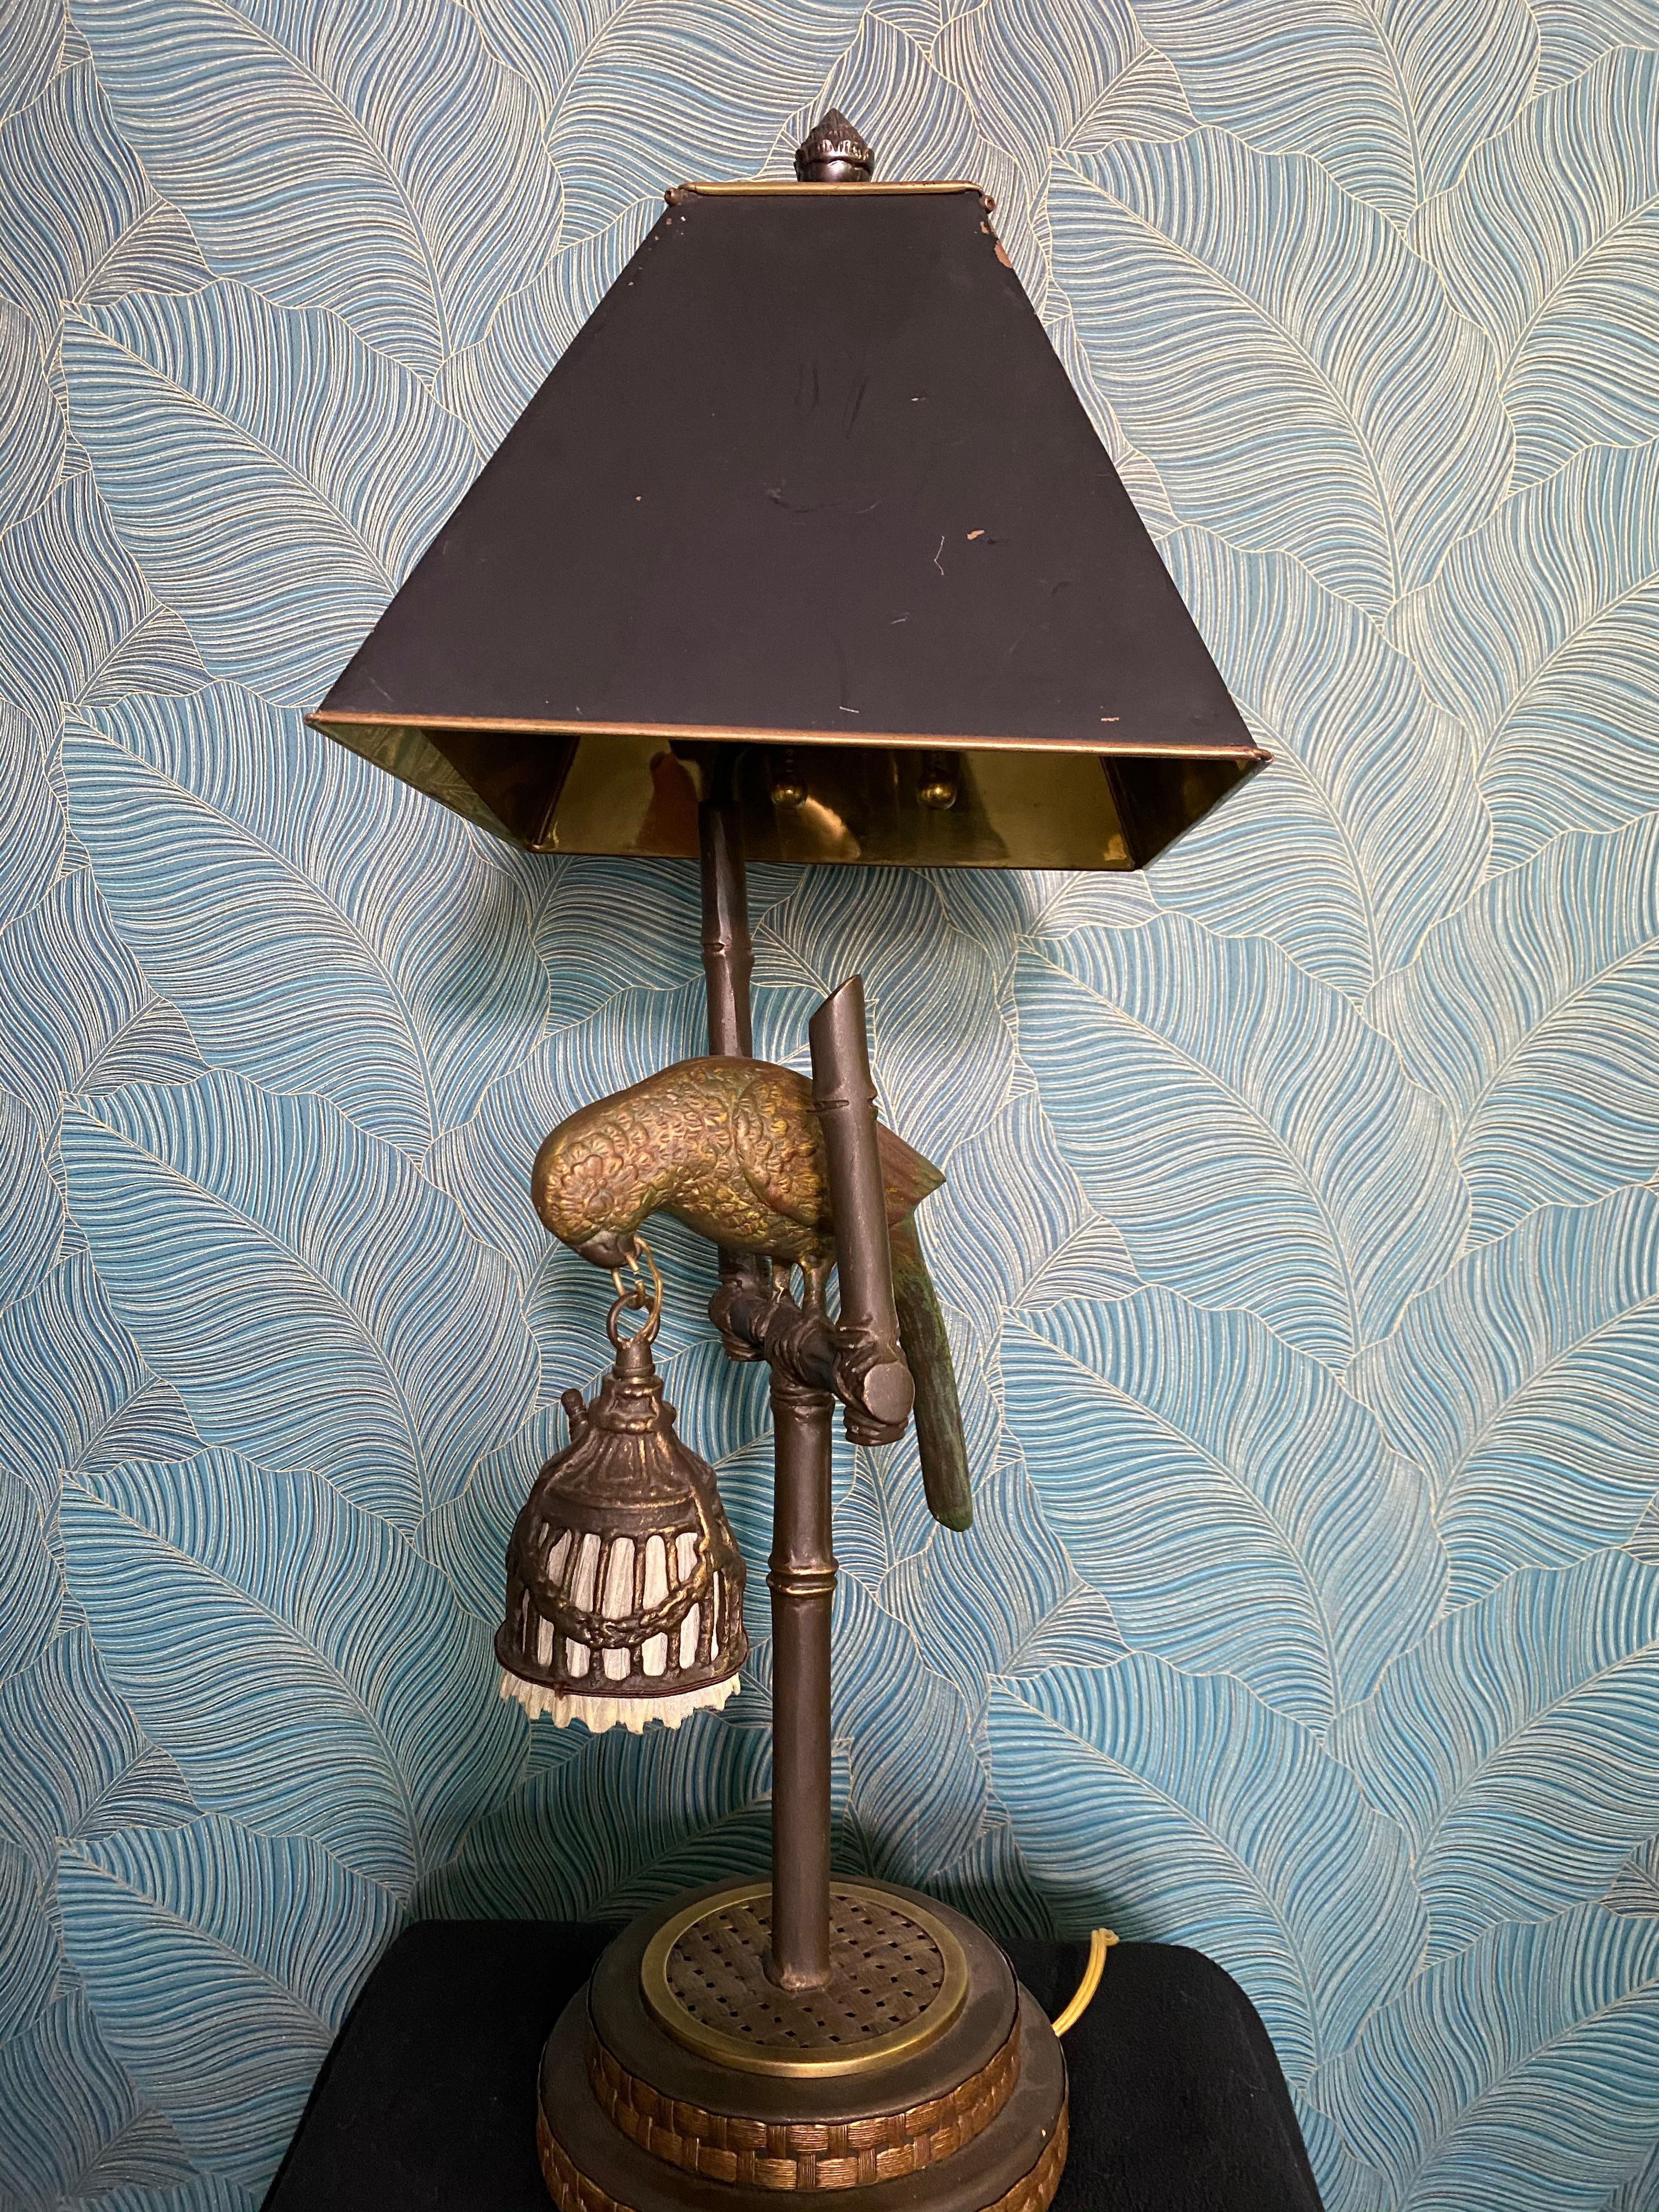 Frederick cooper parrot brass table lamp with night light.
Faux bamboo, parrot holding metal cage with fabric lining,
circa 2000.
No shade included. x.
 
 

   